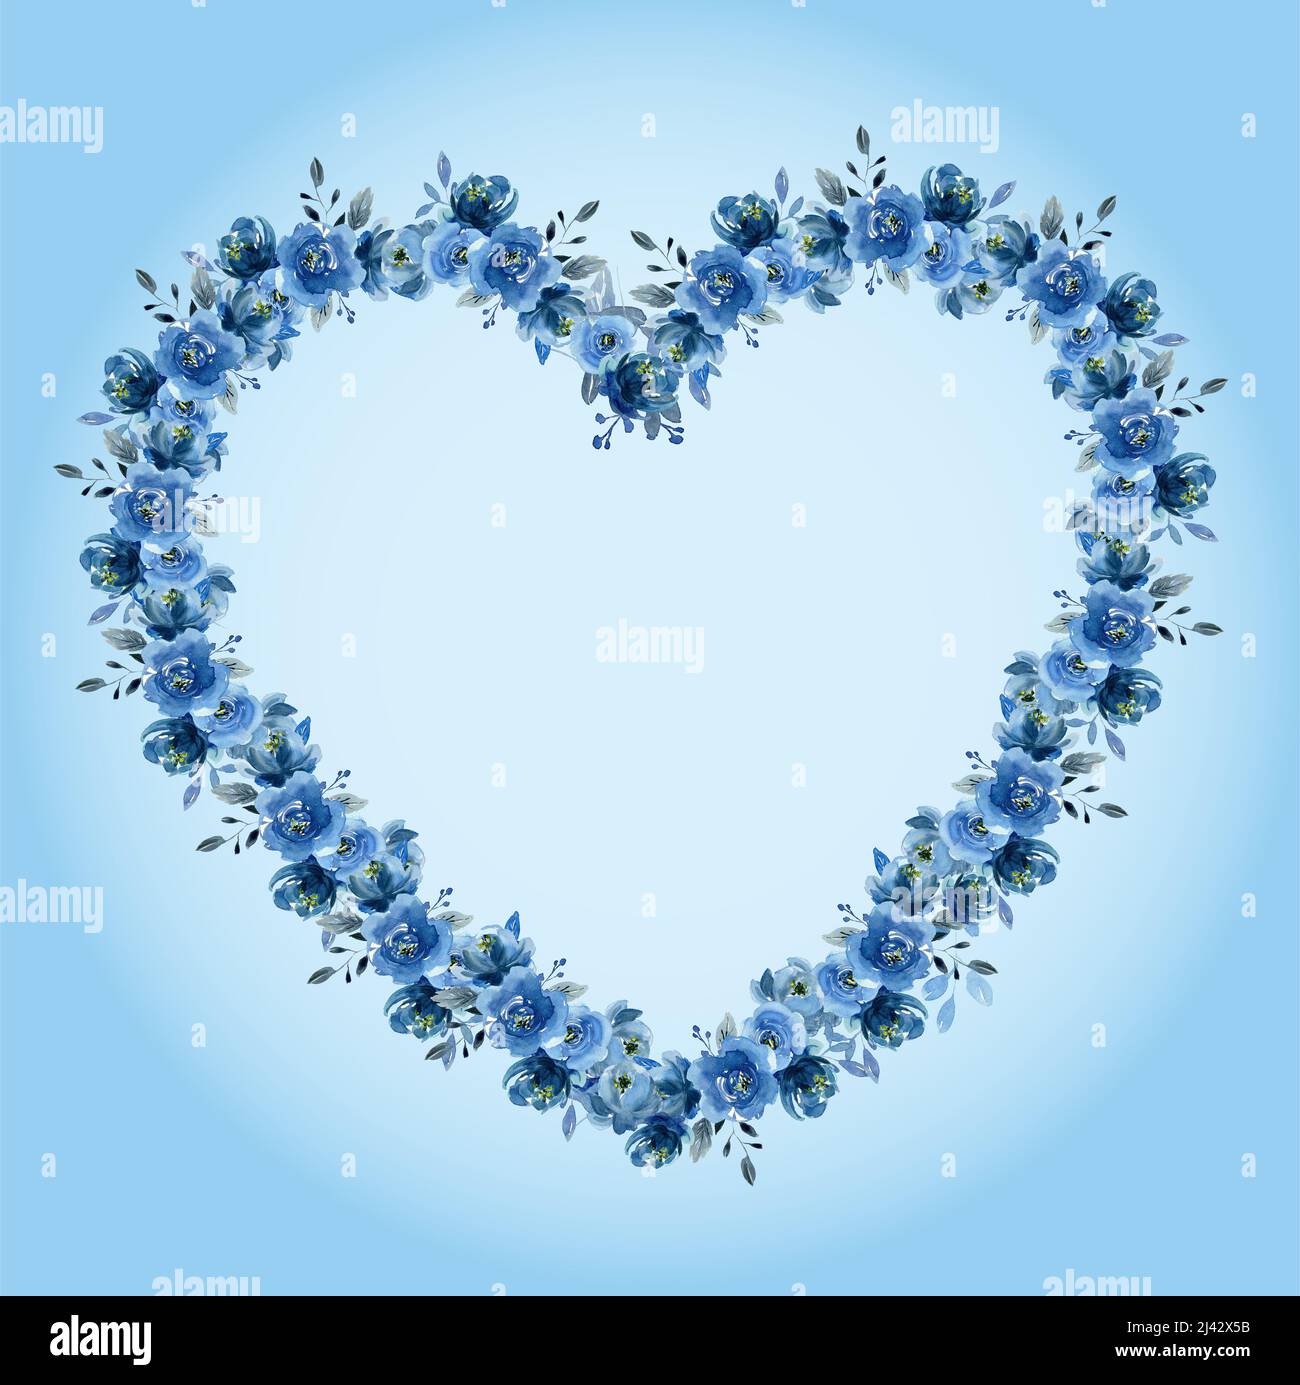 Blue Watercolor Hearts in shape of Heart isolated on gradient blue background Stock Photo